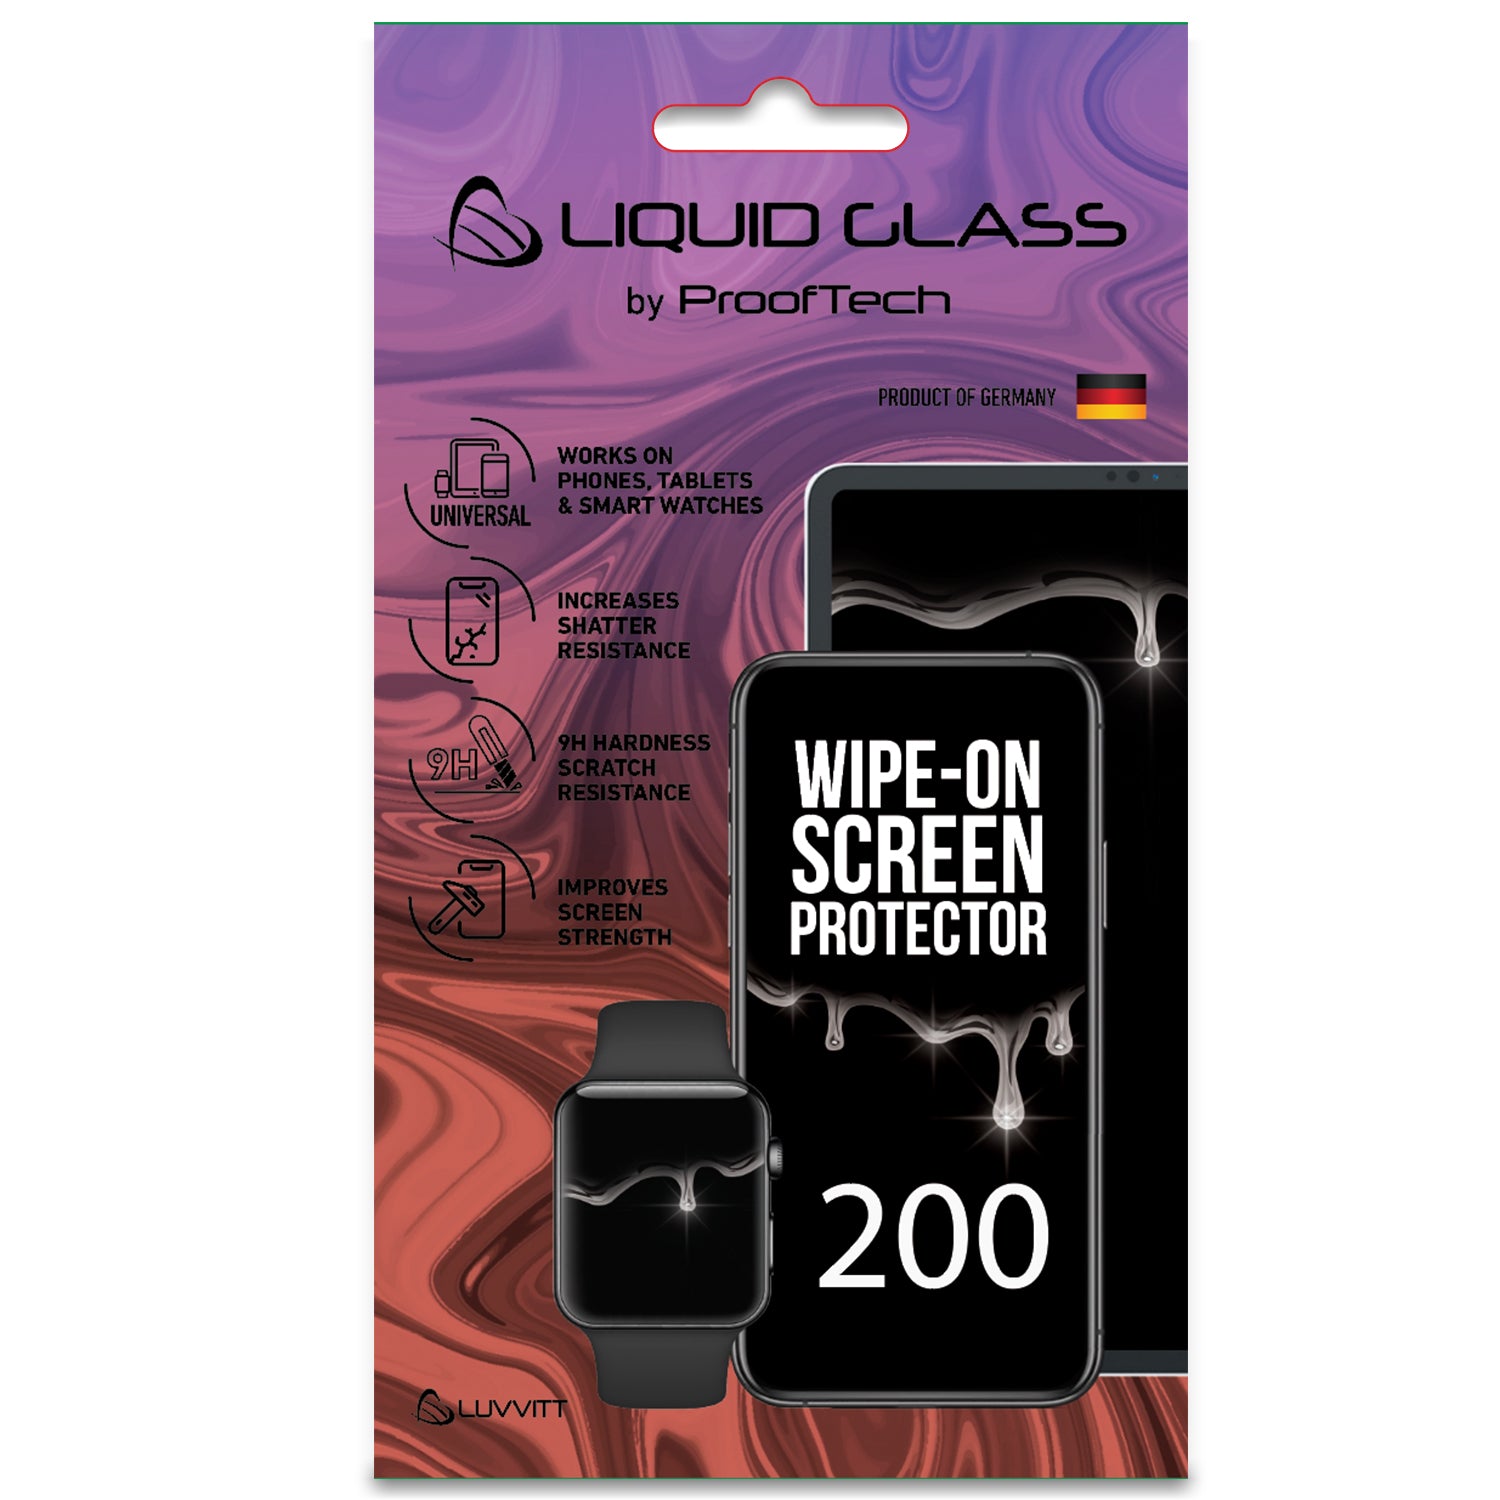 Liquid Glass Screen Protector with $200 Screen Protection Guarantee - Universal